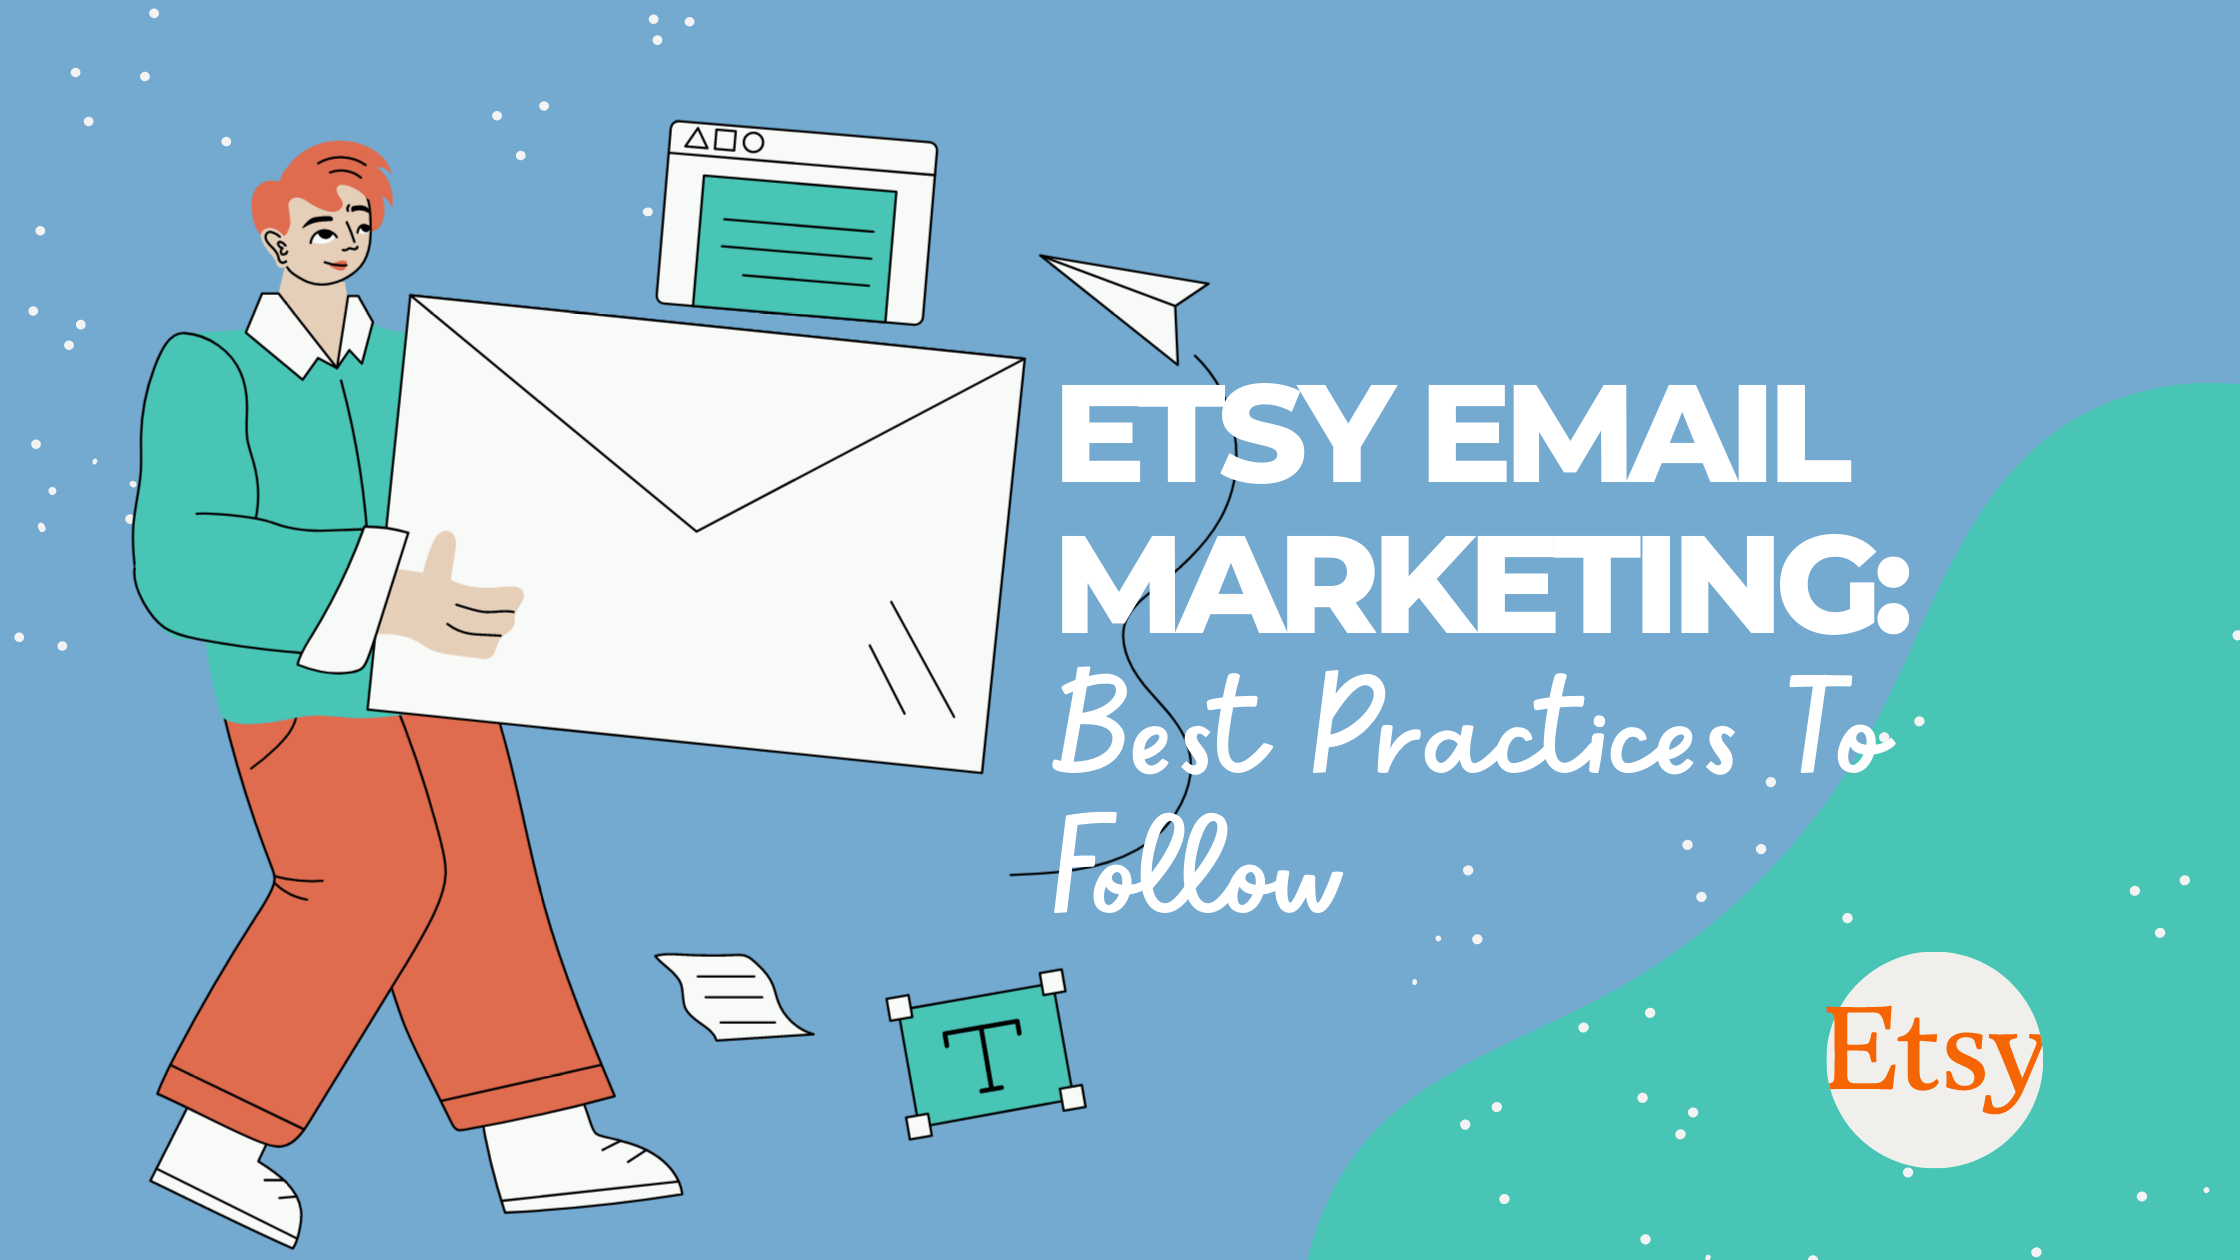 Etsy Email Marketing: Best Practices To Follow